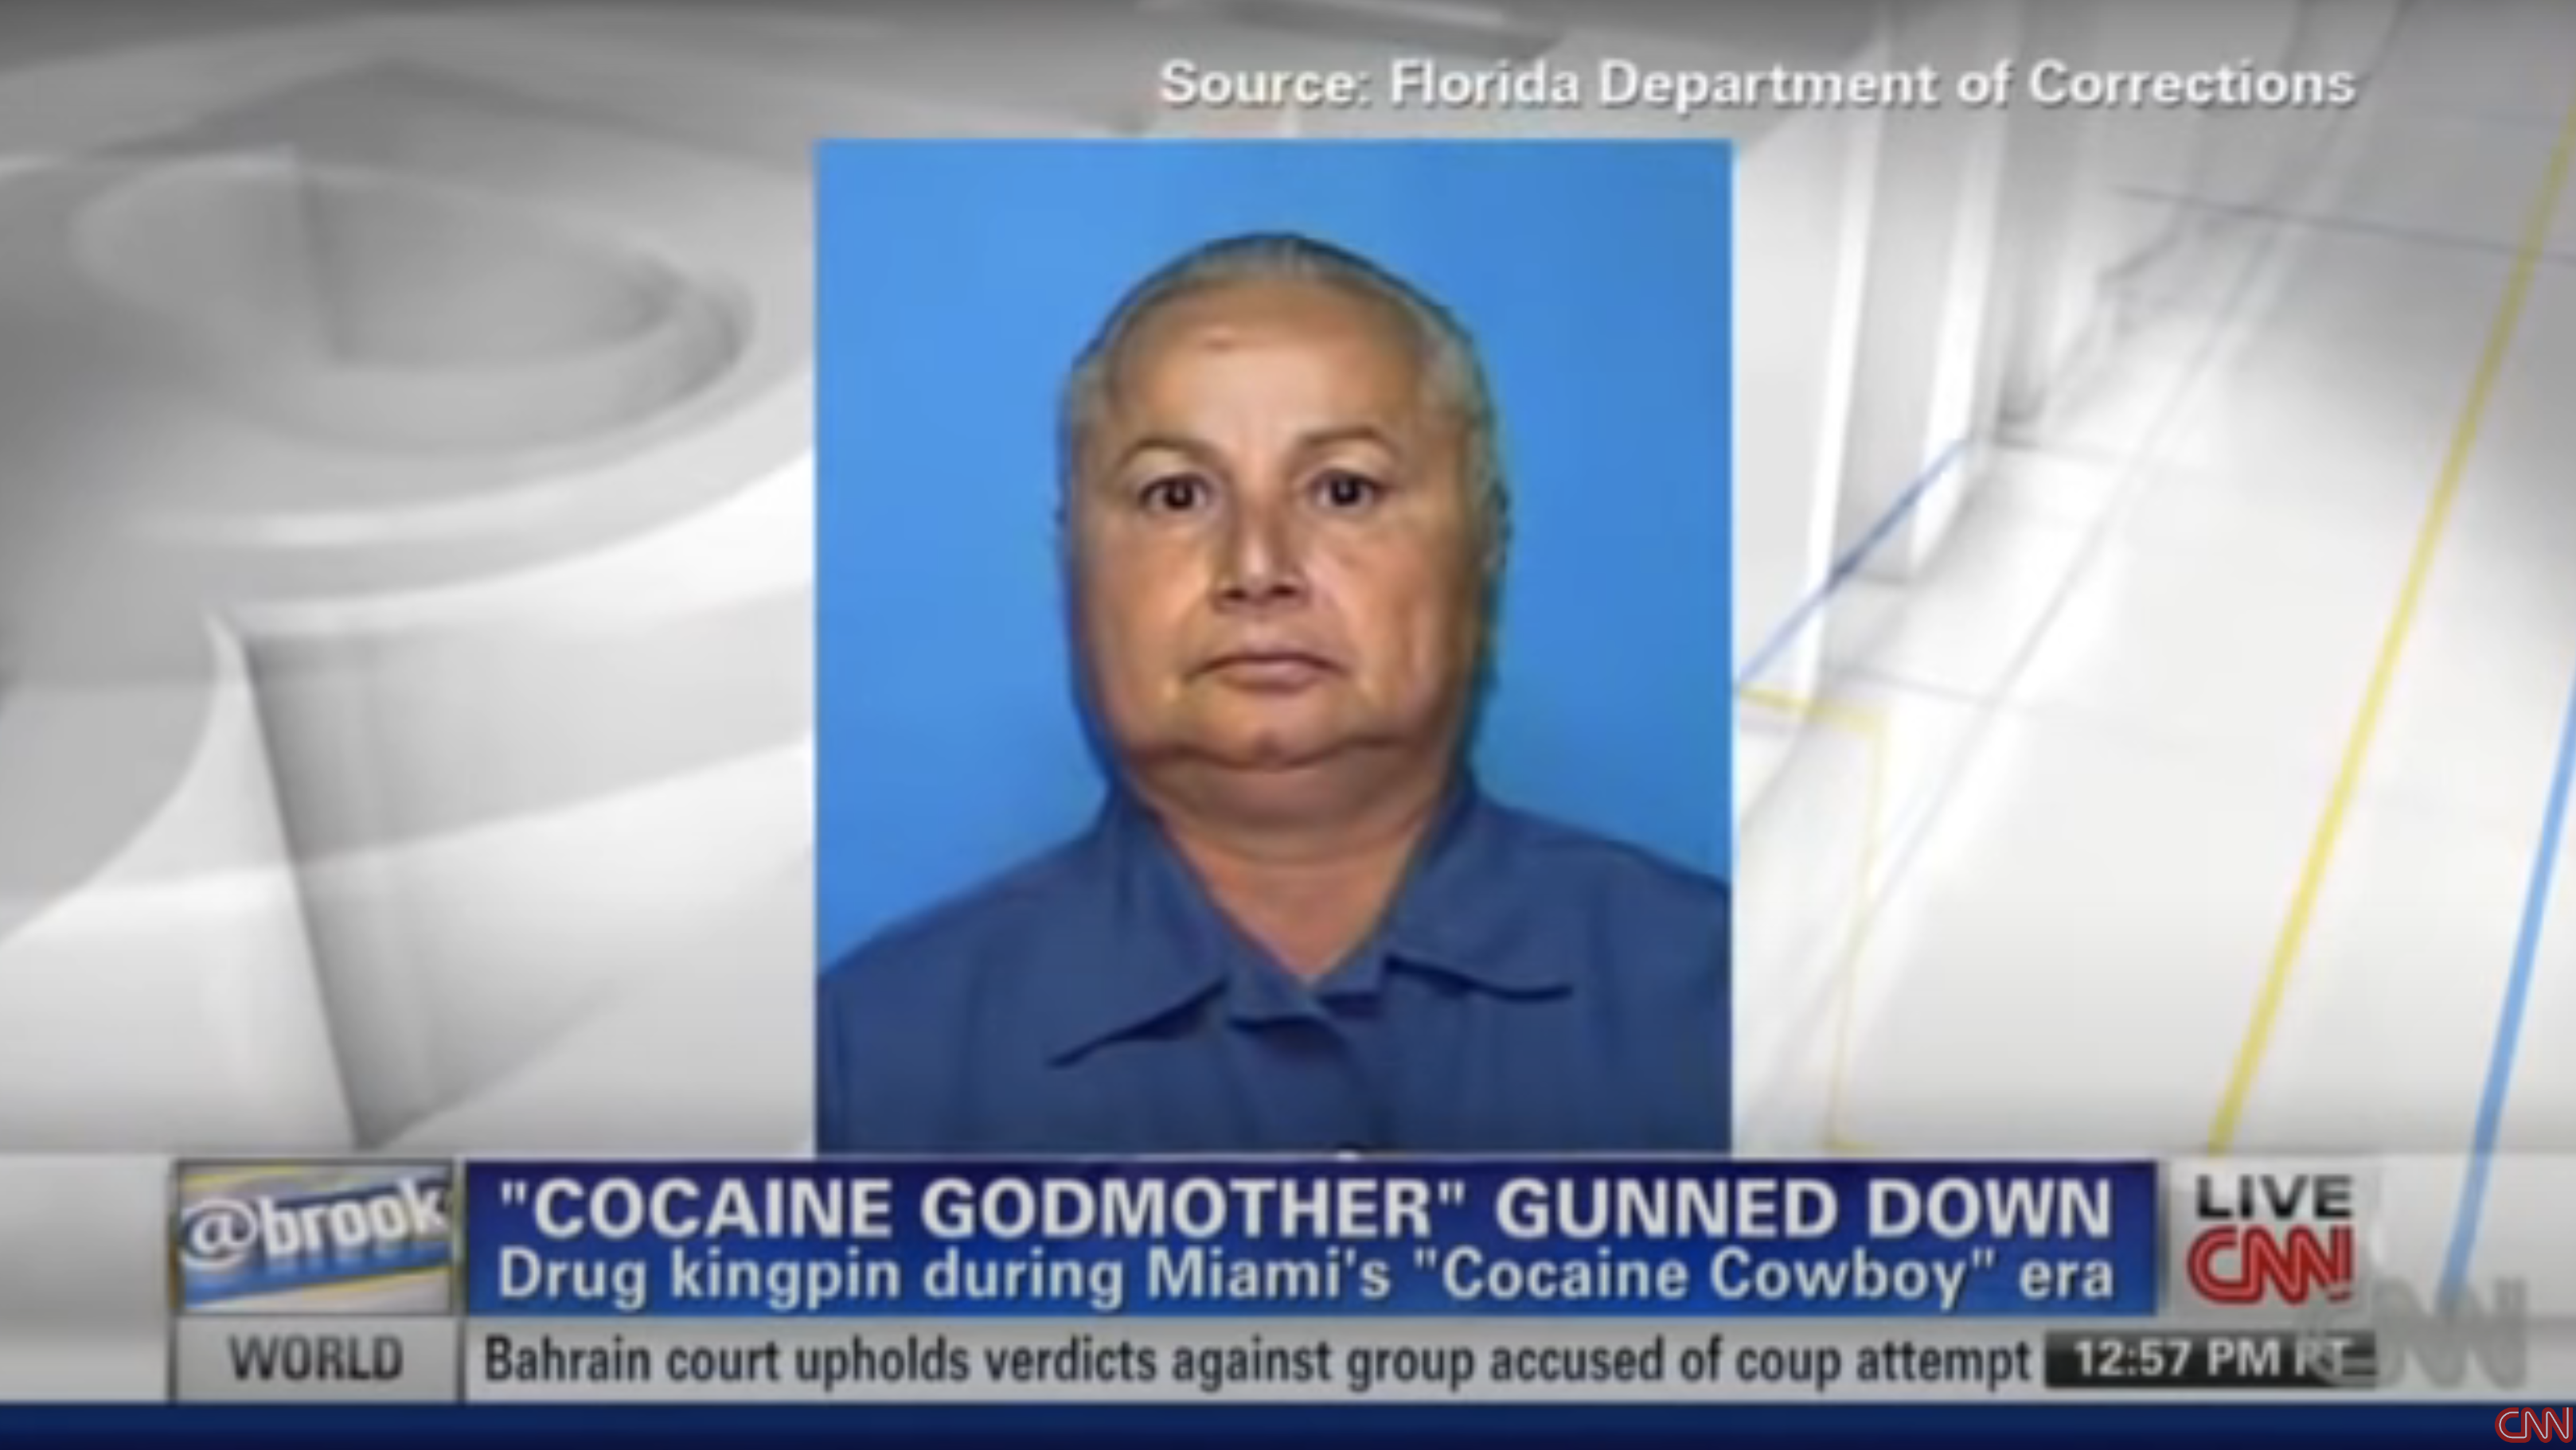 &quot;Cocaine Godmother&quot; gunned down